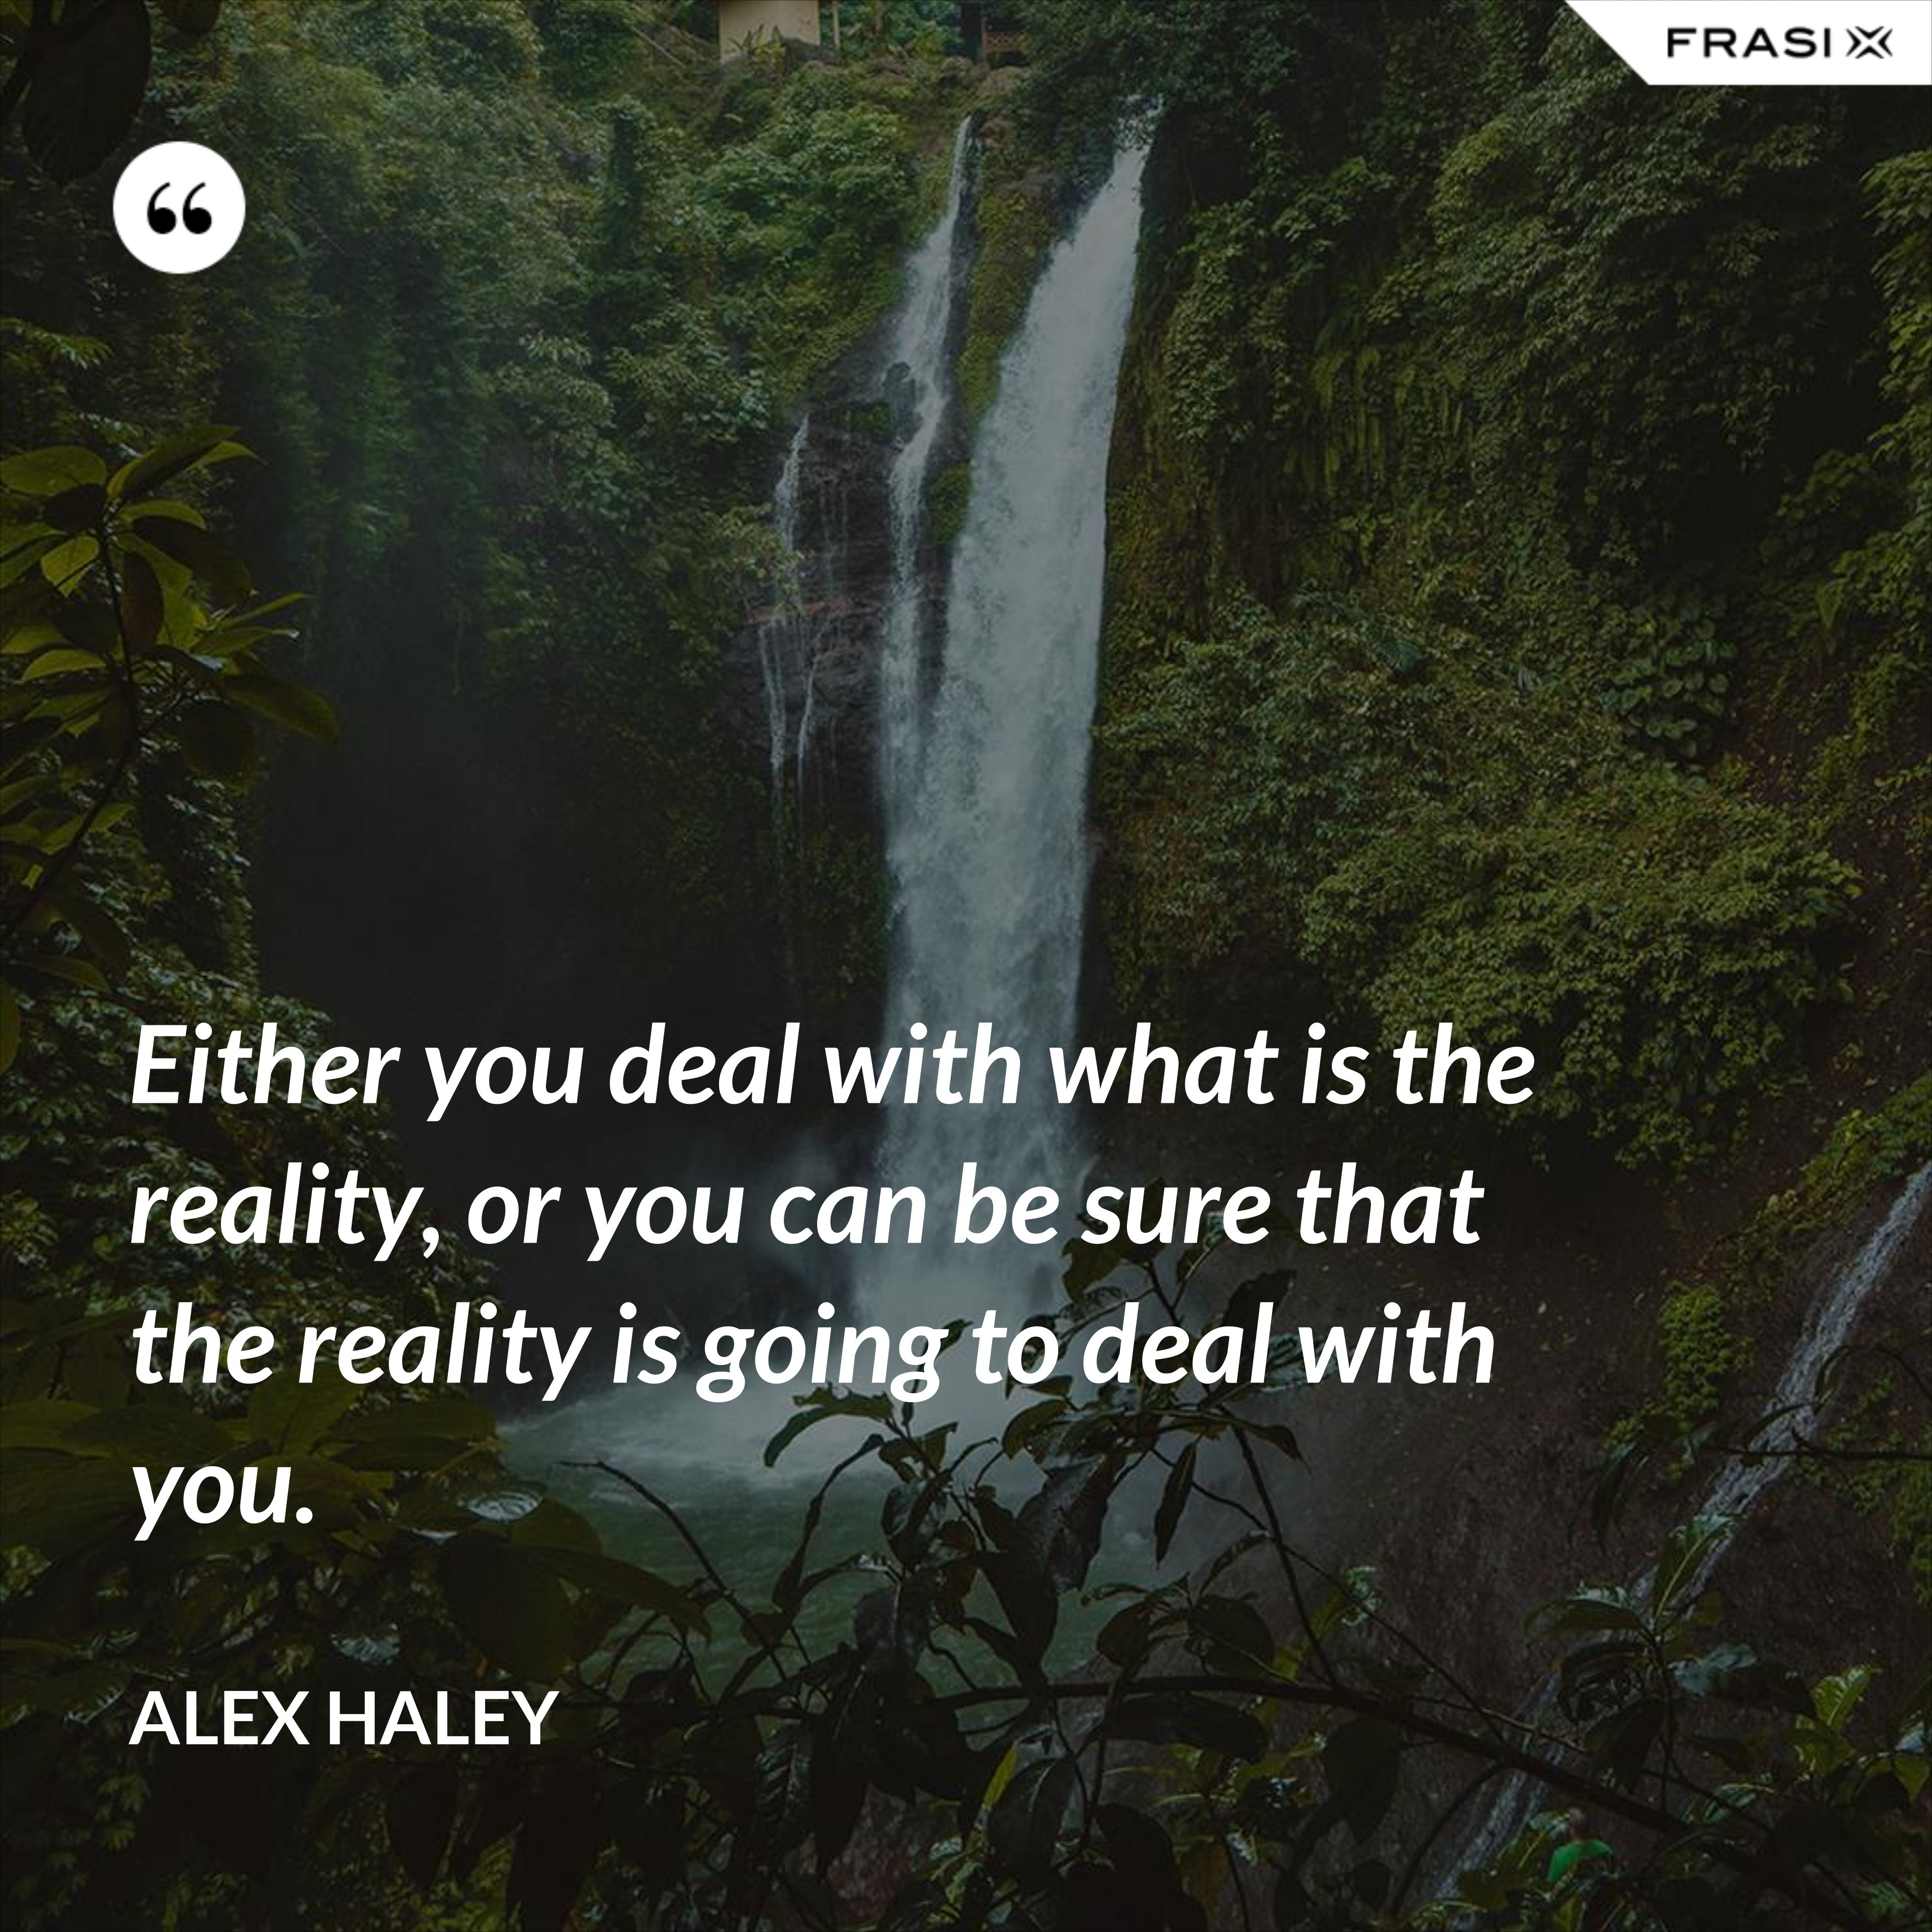 Either you deal with what is the reality, or you can be sure that the reality is going to deal with you. - Alex Haley